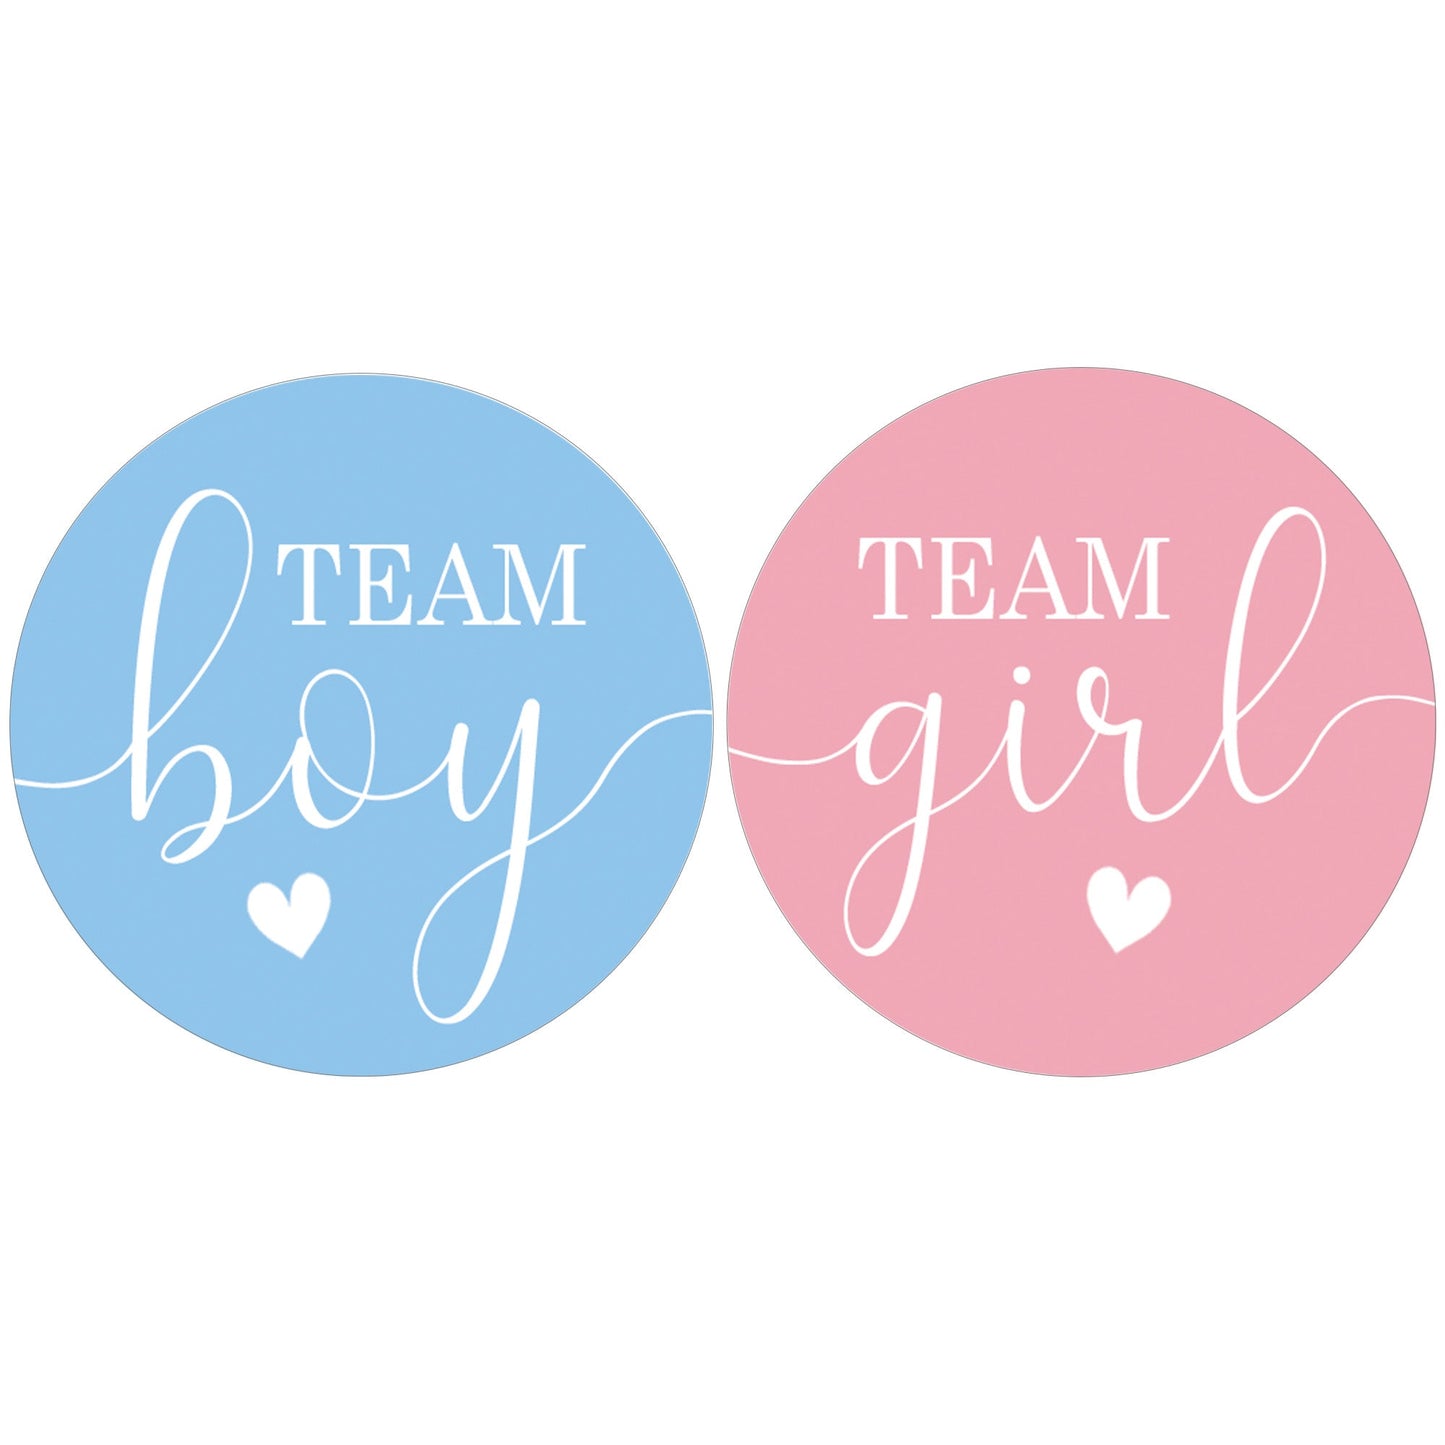 Baby Gender Reveal Party - Team Boy or Team Girl Stickers - 40 Pack